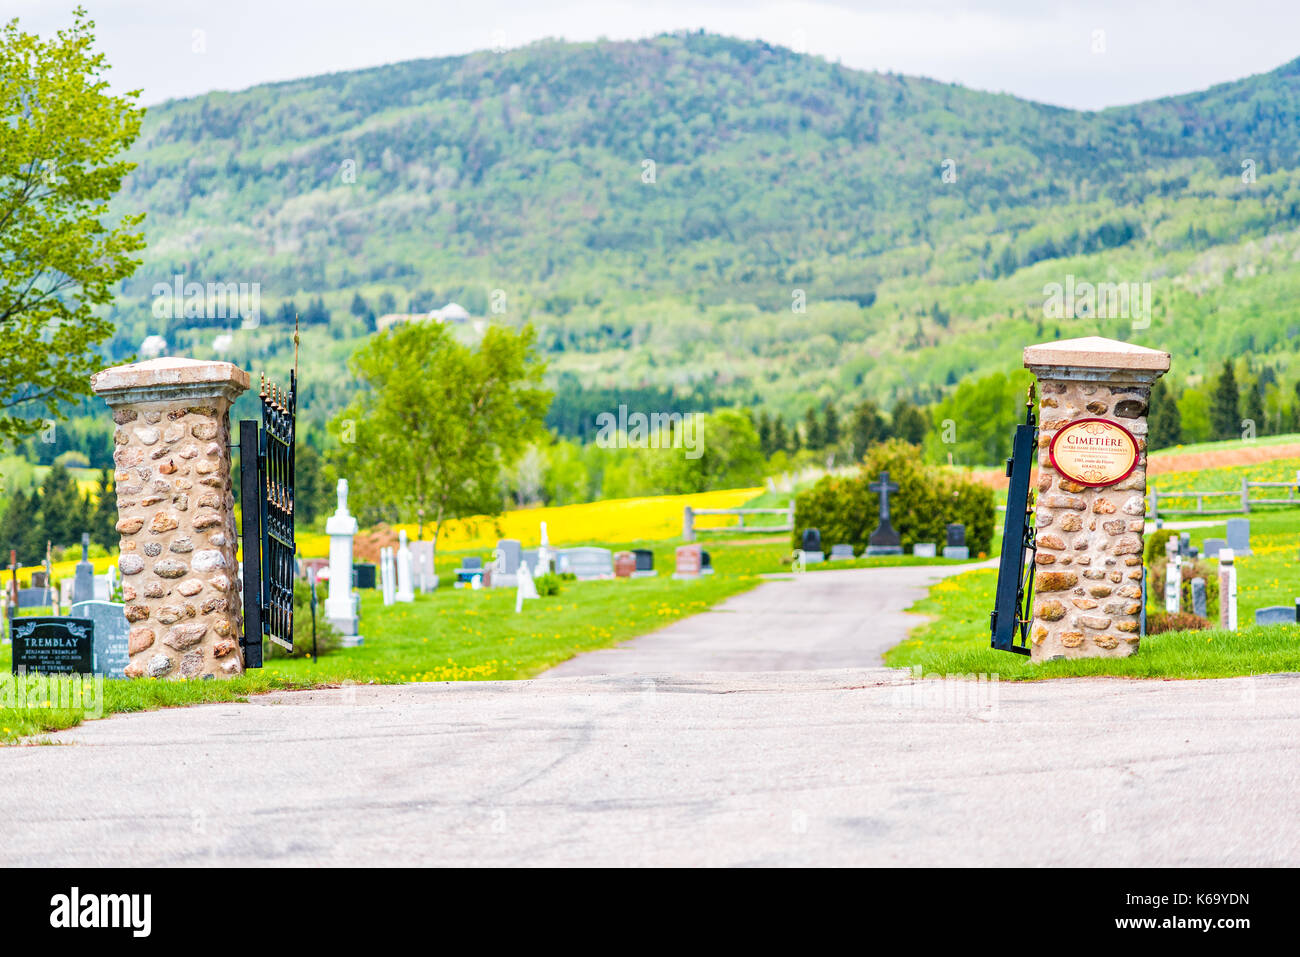 Les Eboulements, Canada - June 2, 2017: Presbytere Des Eboulements cemetery in Charlevoix region of Quebec with open gate, tombstone, graves, mountain Stock Photo